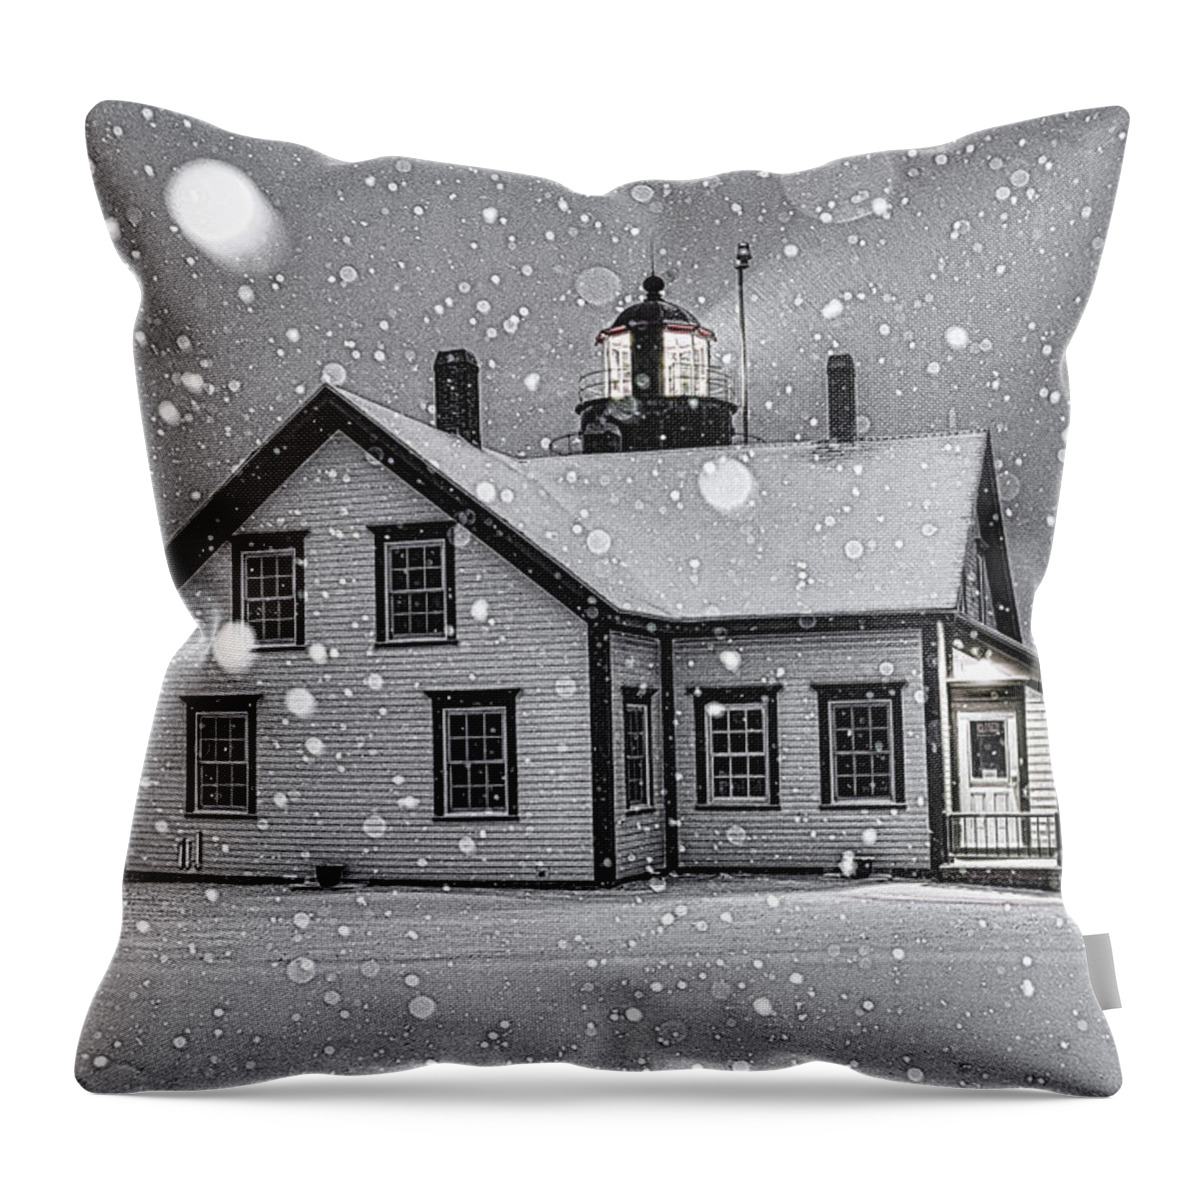 Let It Snow Throw Pillow featuring the photograph Let it Snow by Marty Saccone